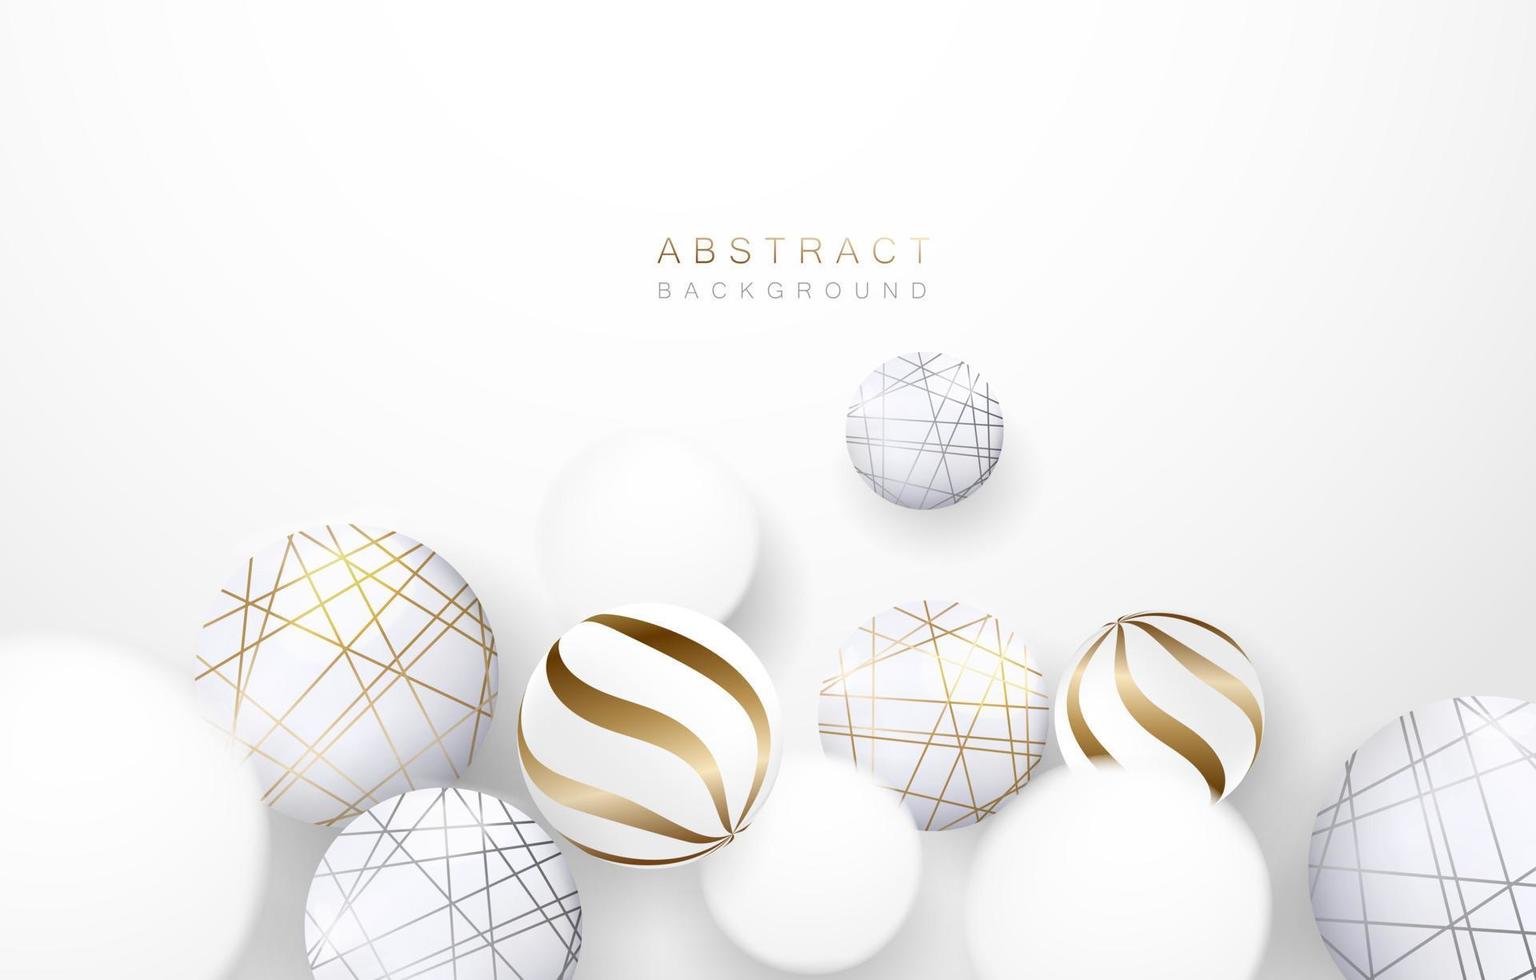 Abstract white gray background with 3d circle ball and golden pattern elements. Art design concept for business banner, poster, cover or backgrounds. Vector illustration